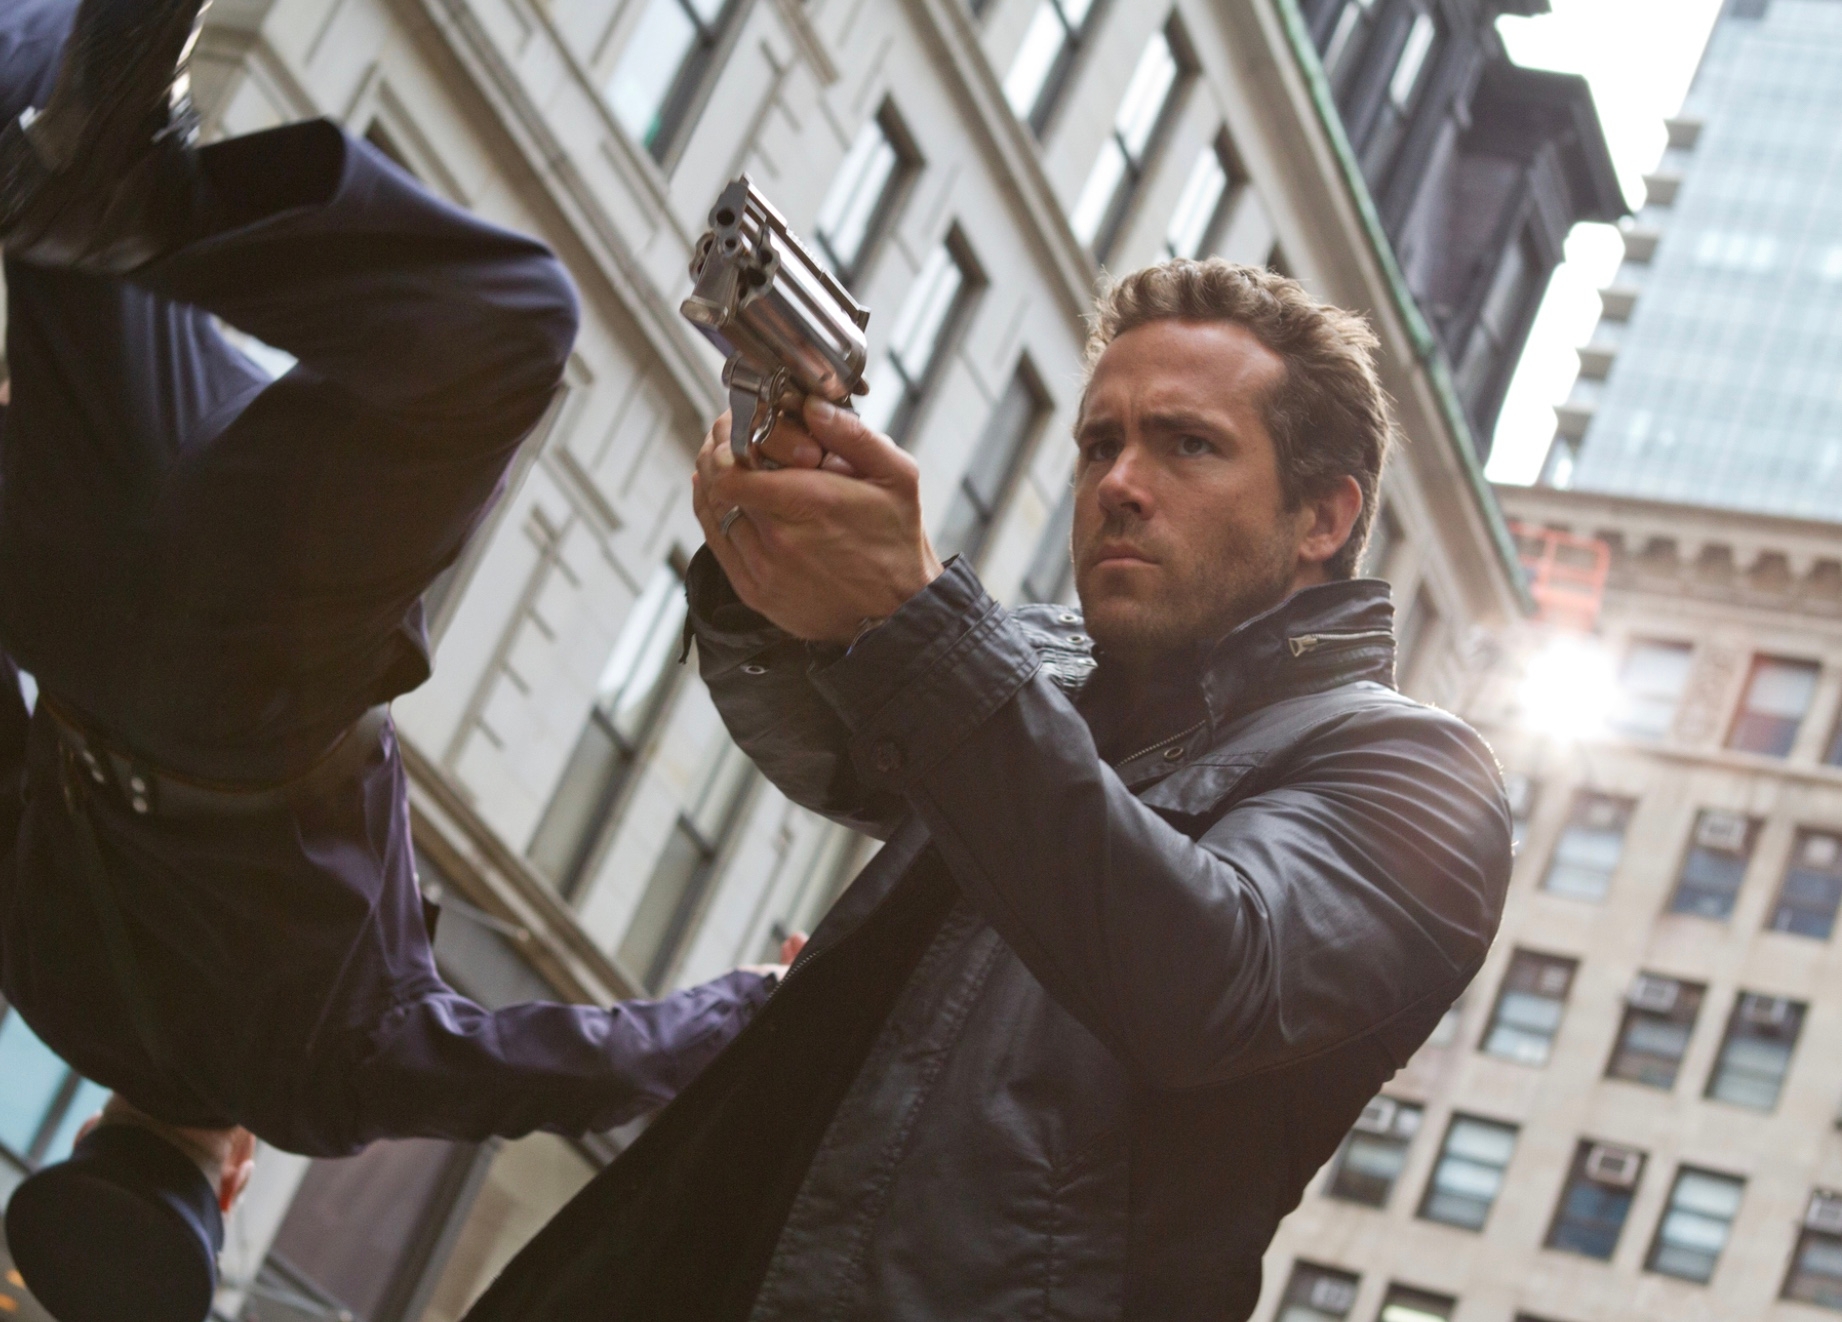 R.I.P.D: One of Ryan Reynolds' worst movies is bizarrely getting a sequel